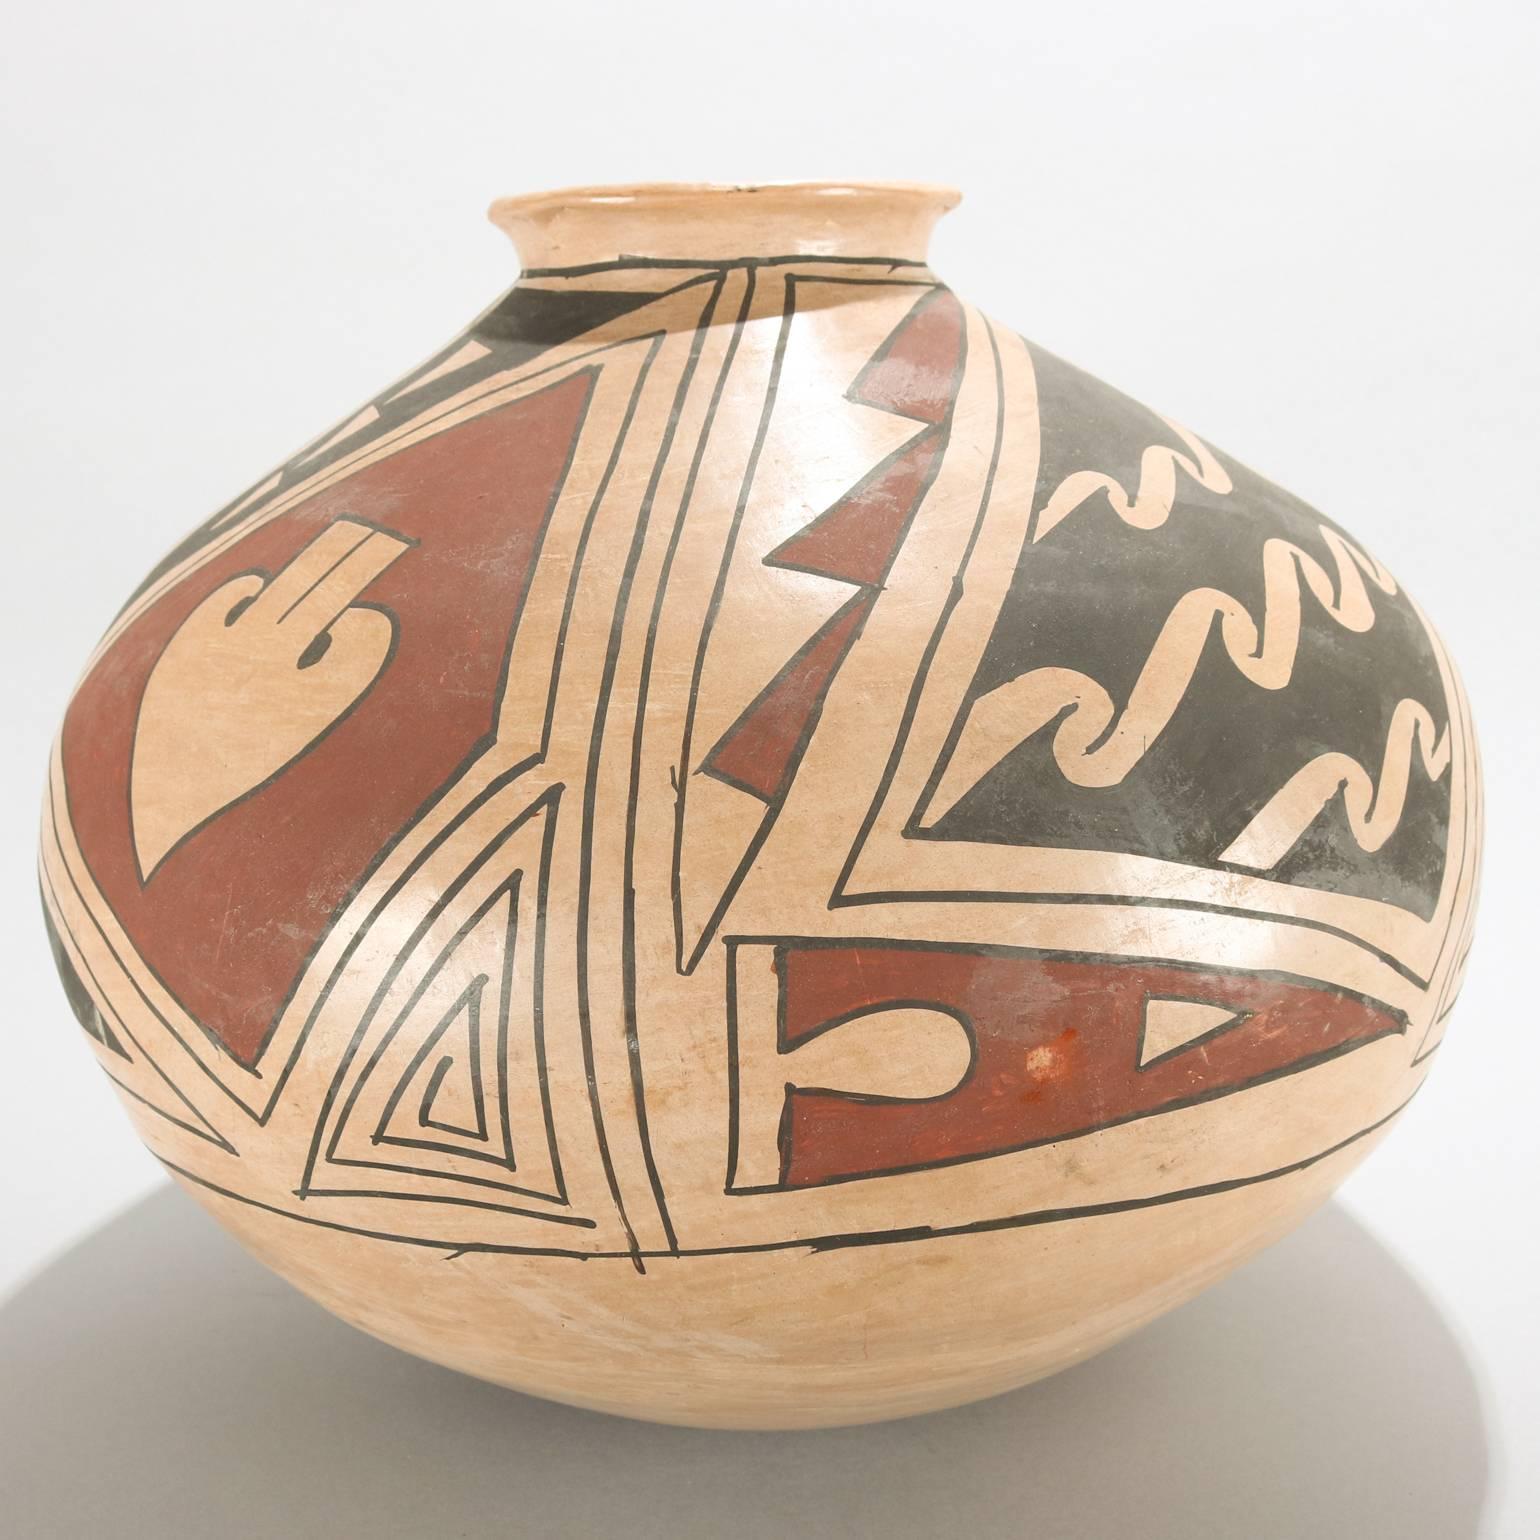 Oversized large antique Native American Indian Acoma Pueblo hand-painted thrown pottery water jar features stylized floral and geometric slip decoration, 20th century

Measures: 13" height x 13" diameter.

